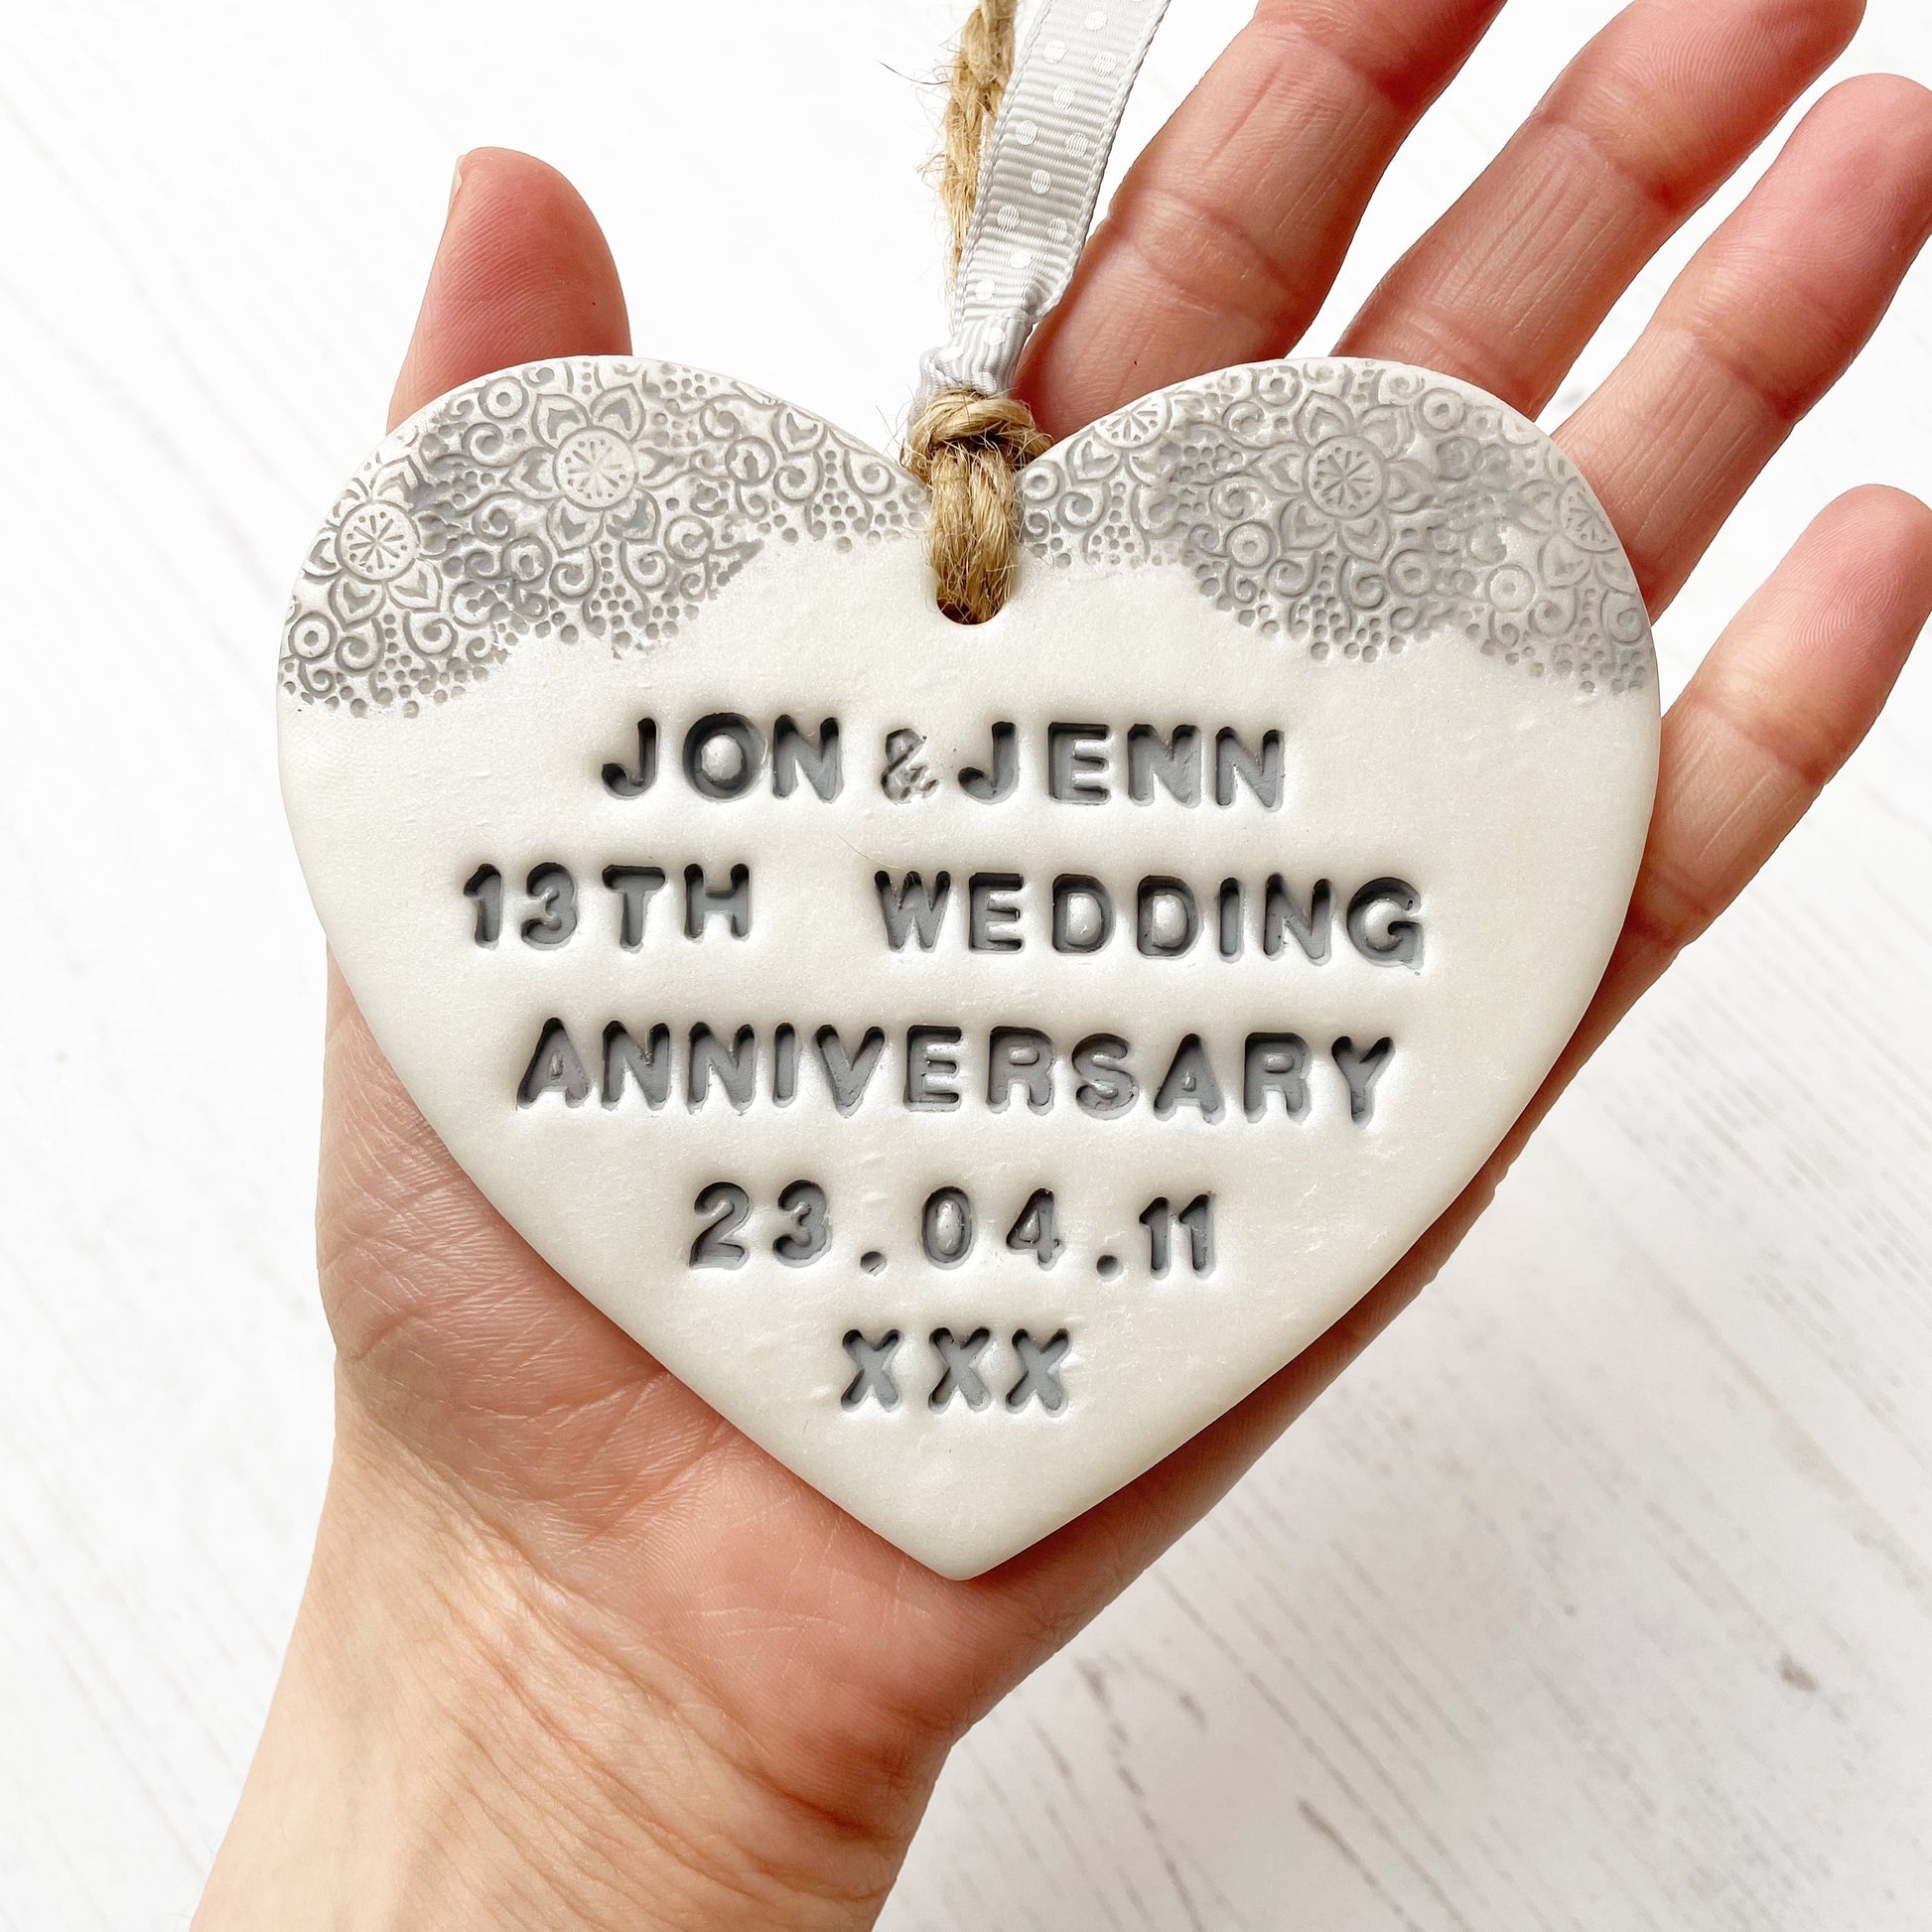 Personalised 13th anniversary gift, pearlised white clay hanging heart with a grey lace edge at the top of the heart, the heart is personalised with JON & JENN 13TH WEDDING ANNIVERSARY 23.04.11 XXX